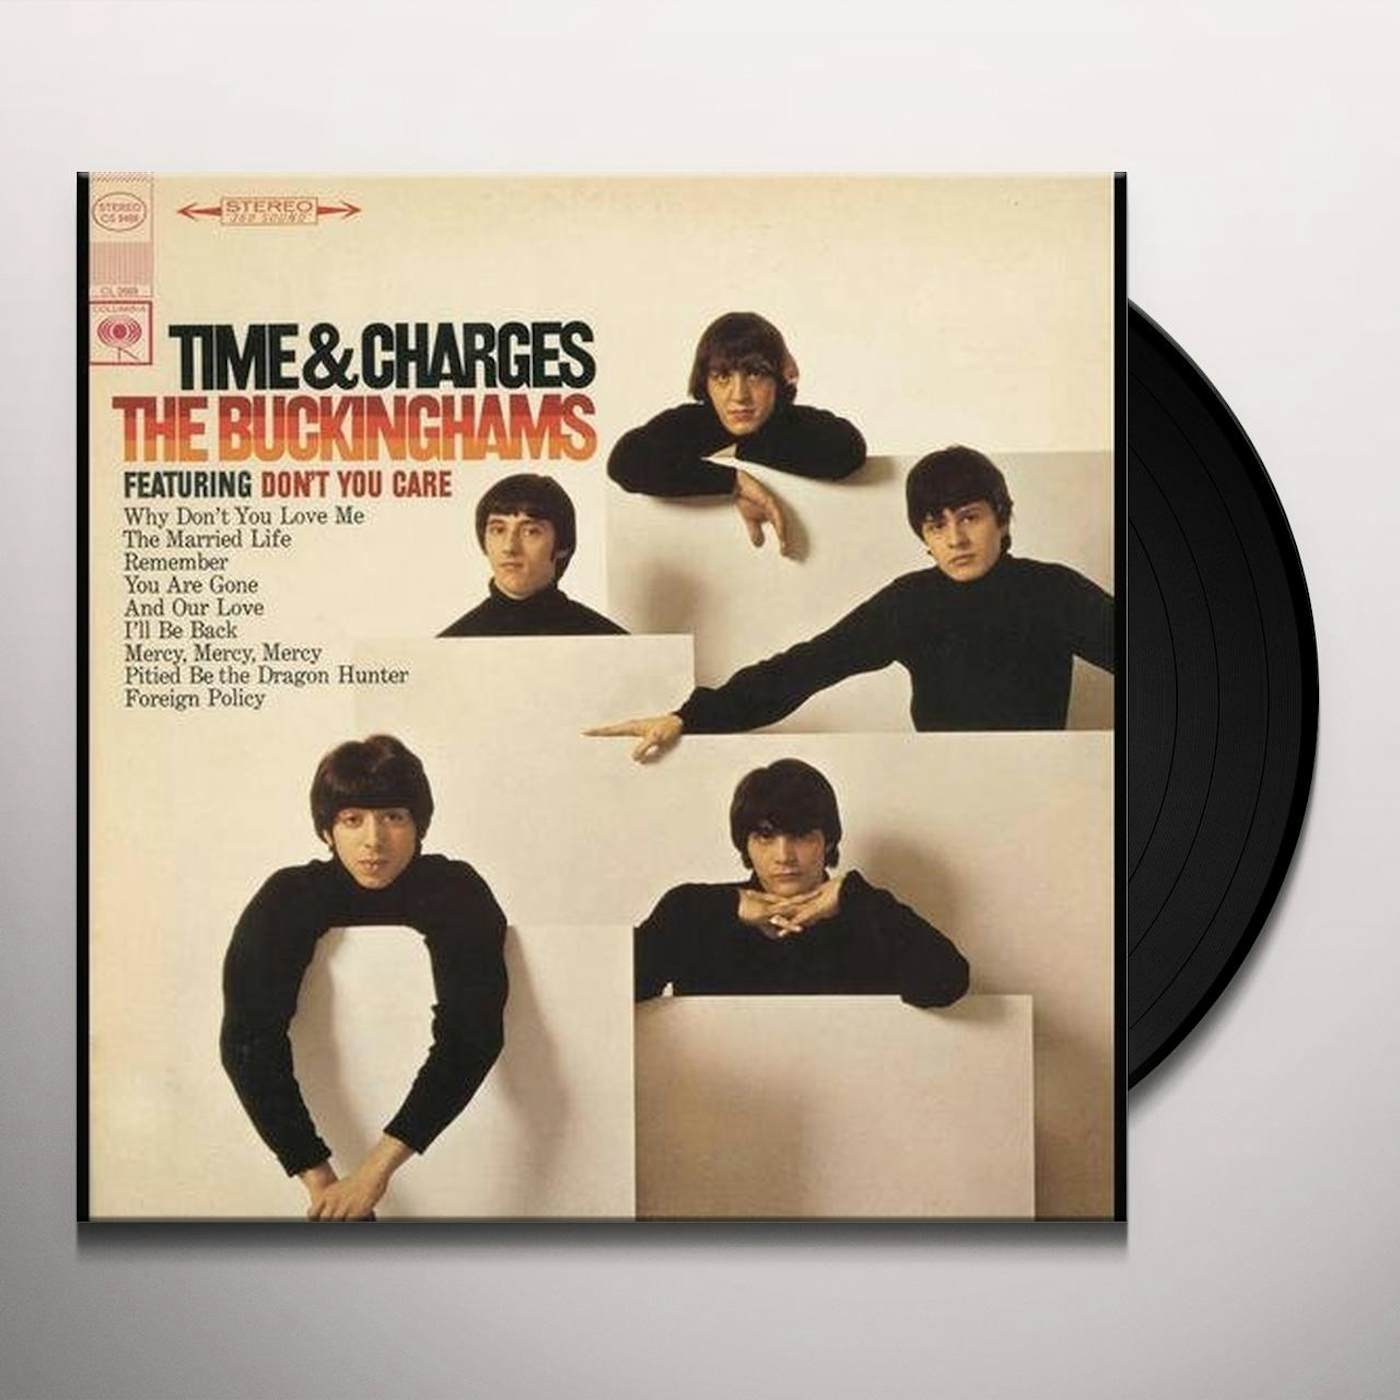 The Buckinghams Time & Charges Vinyl Record